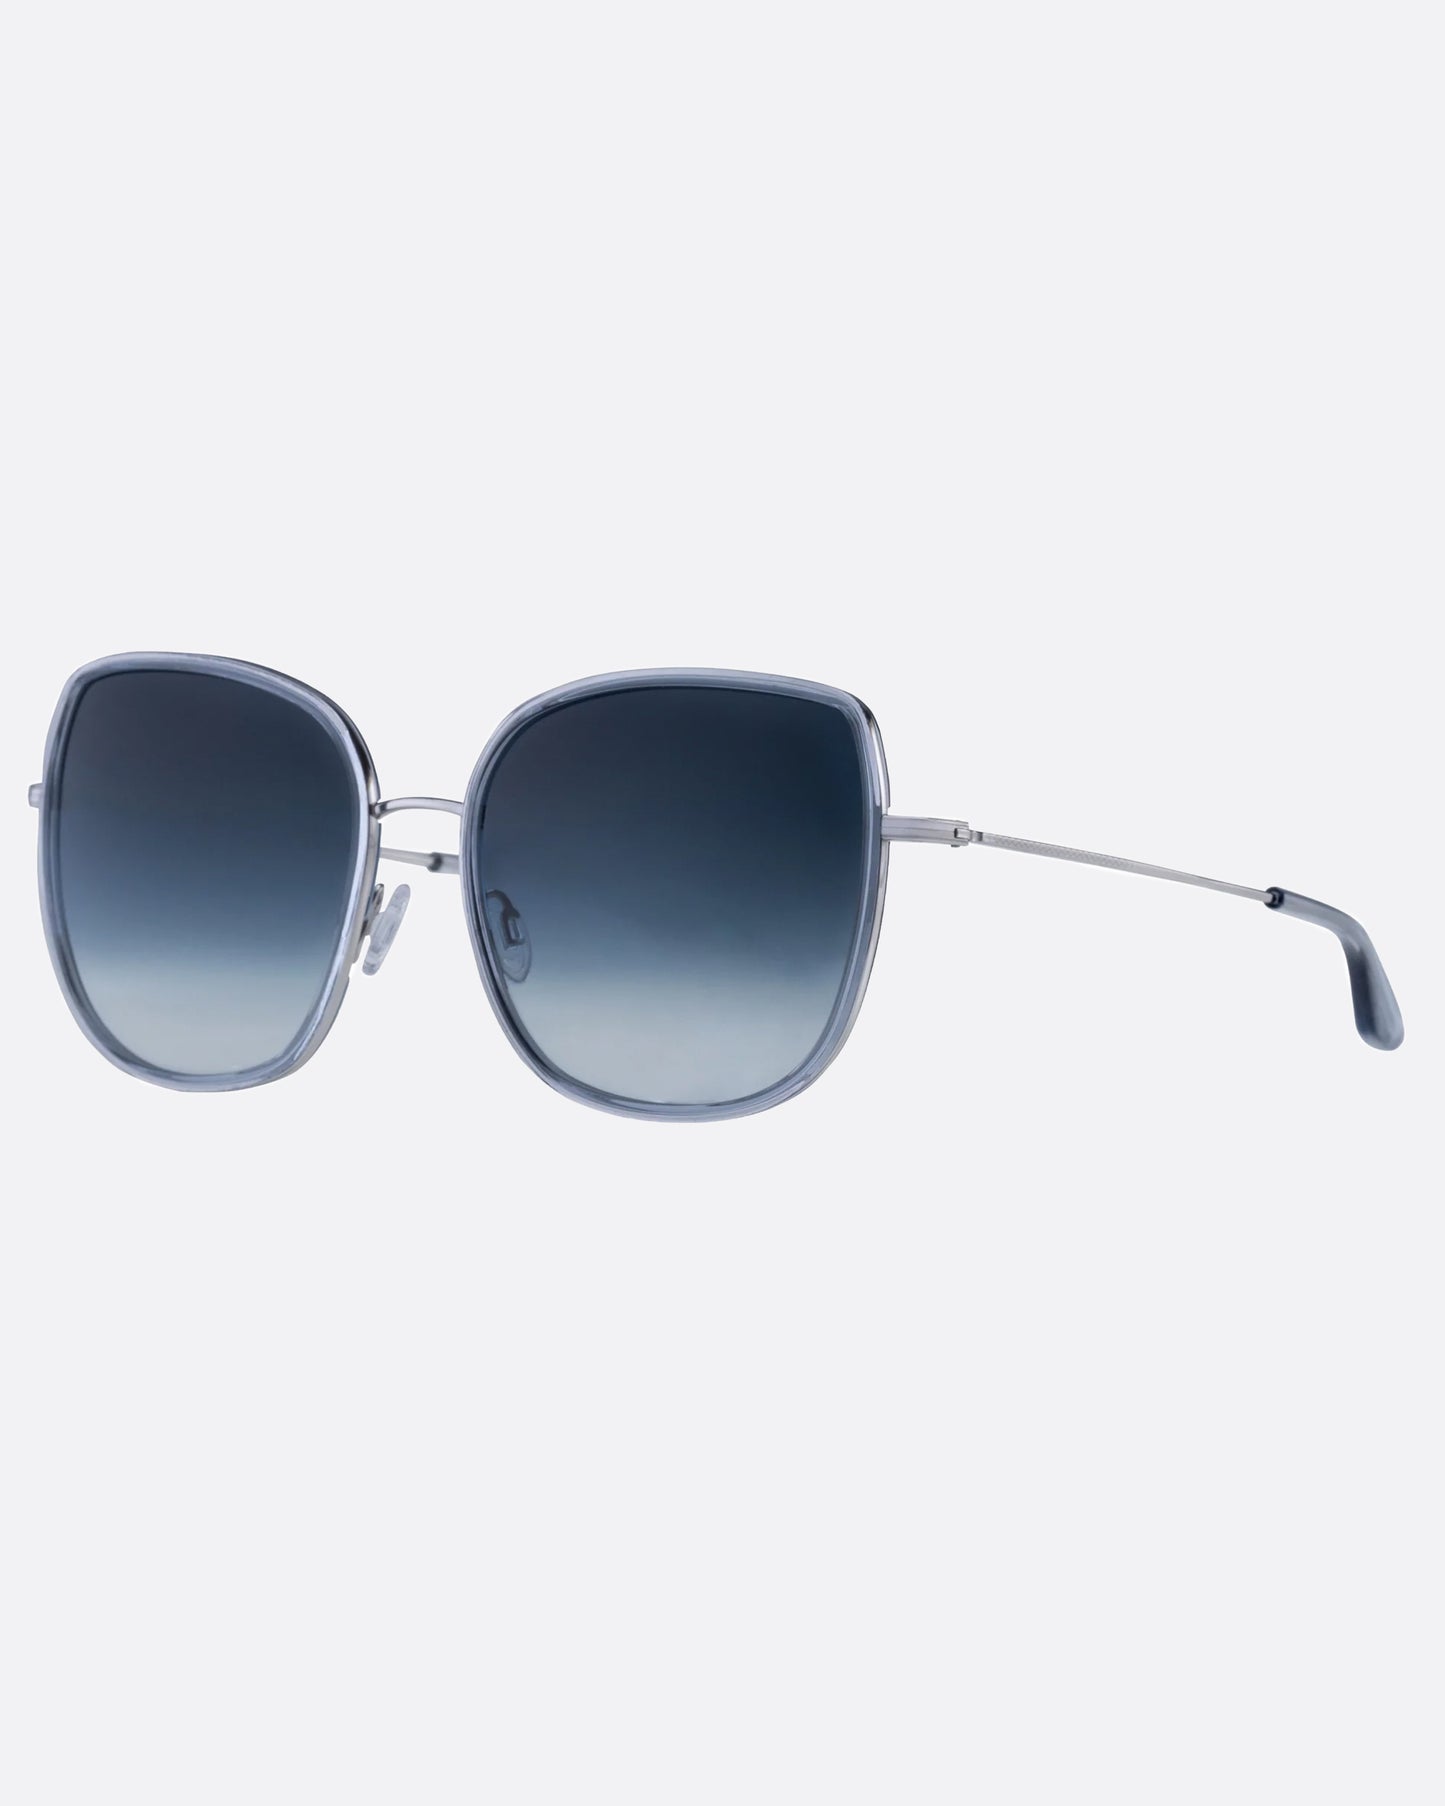 A pair of luxurious, but lightweight glamorous sunglasses crafted in titanium and Japanese acetate.